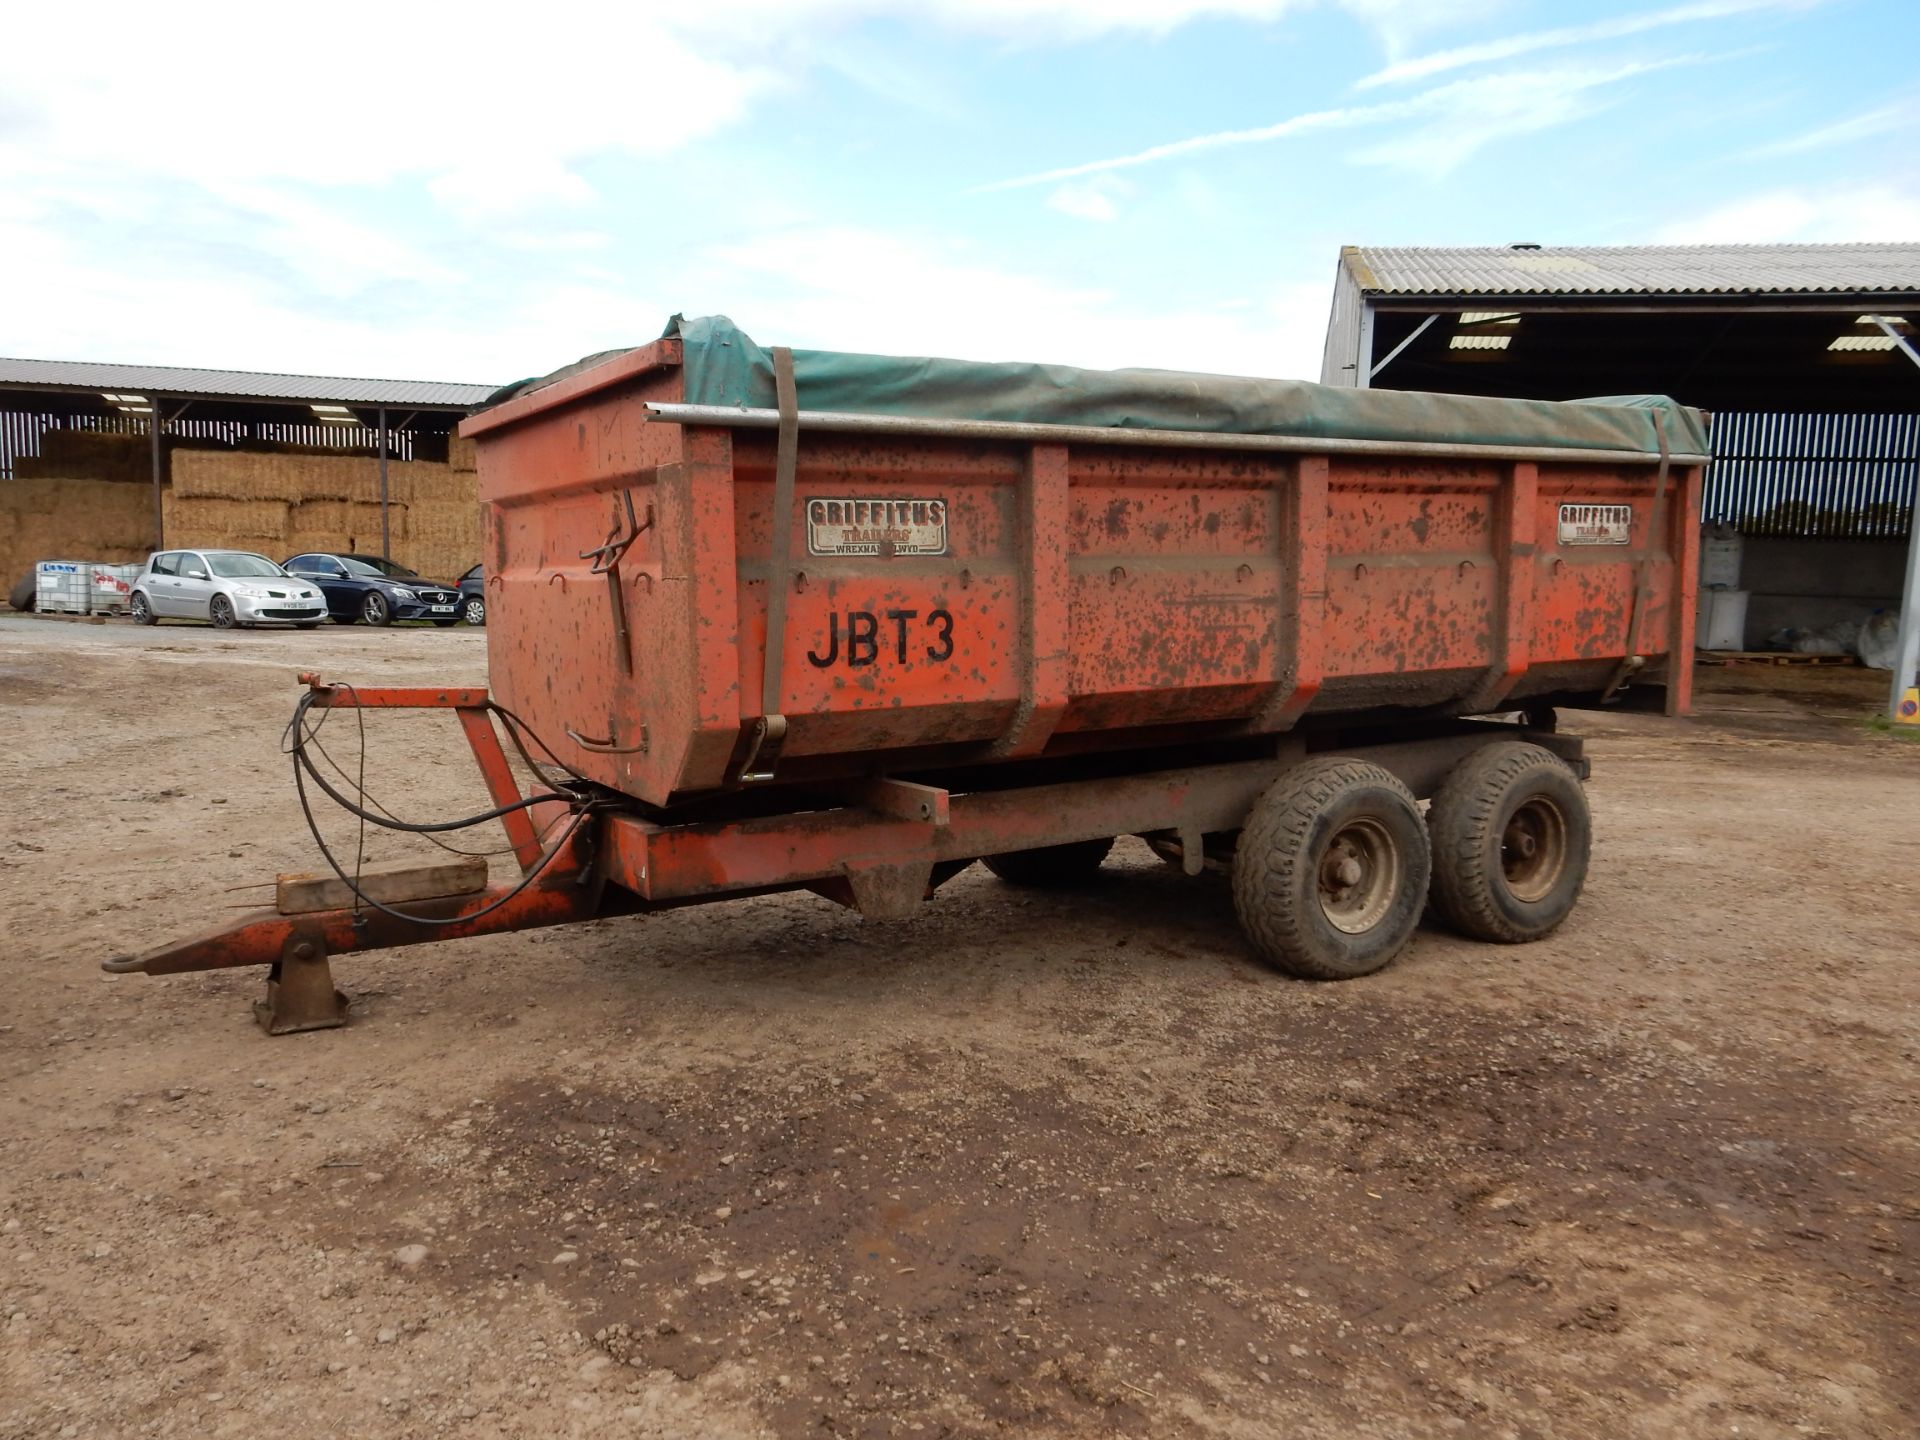 Griffiths 8 tonne trailer, - Image 4 of 4